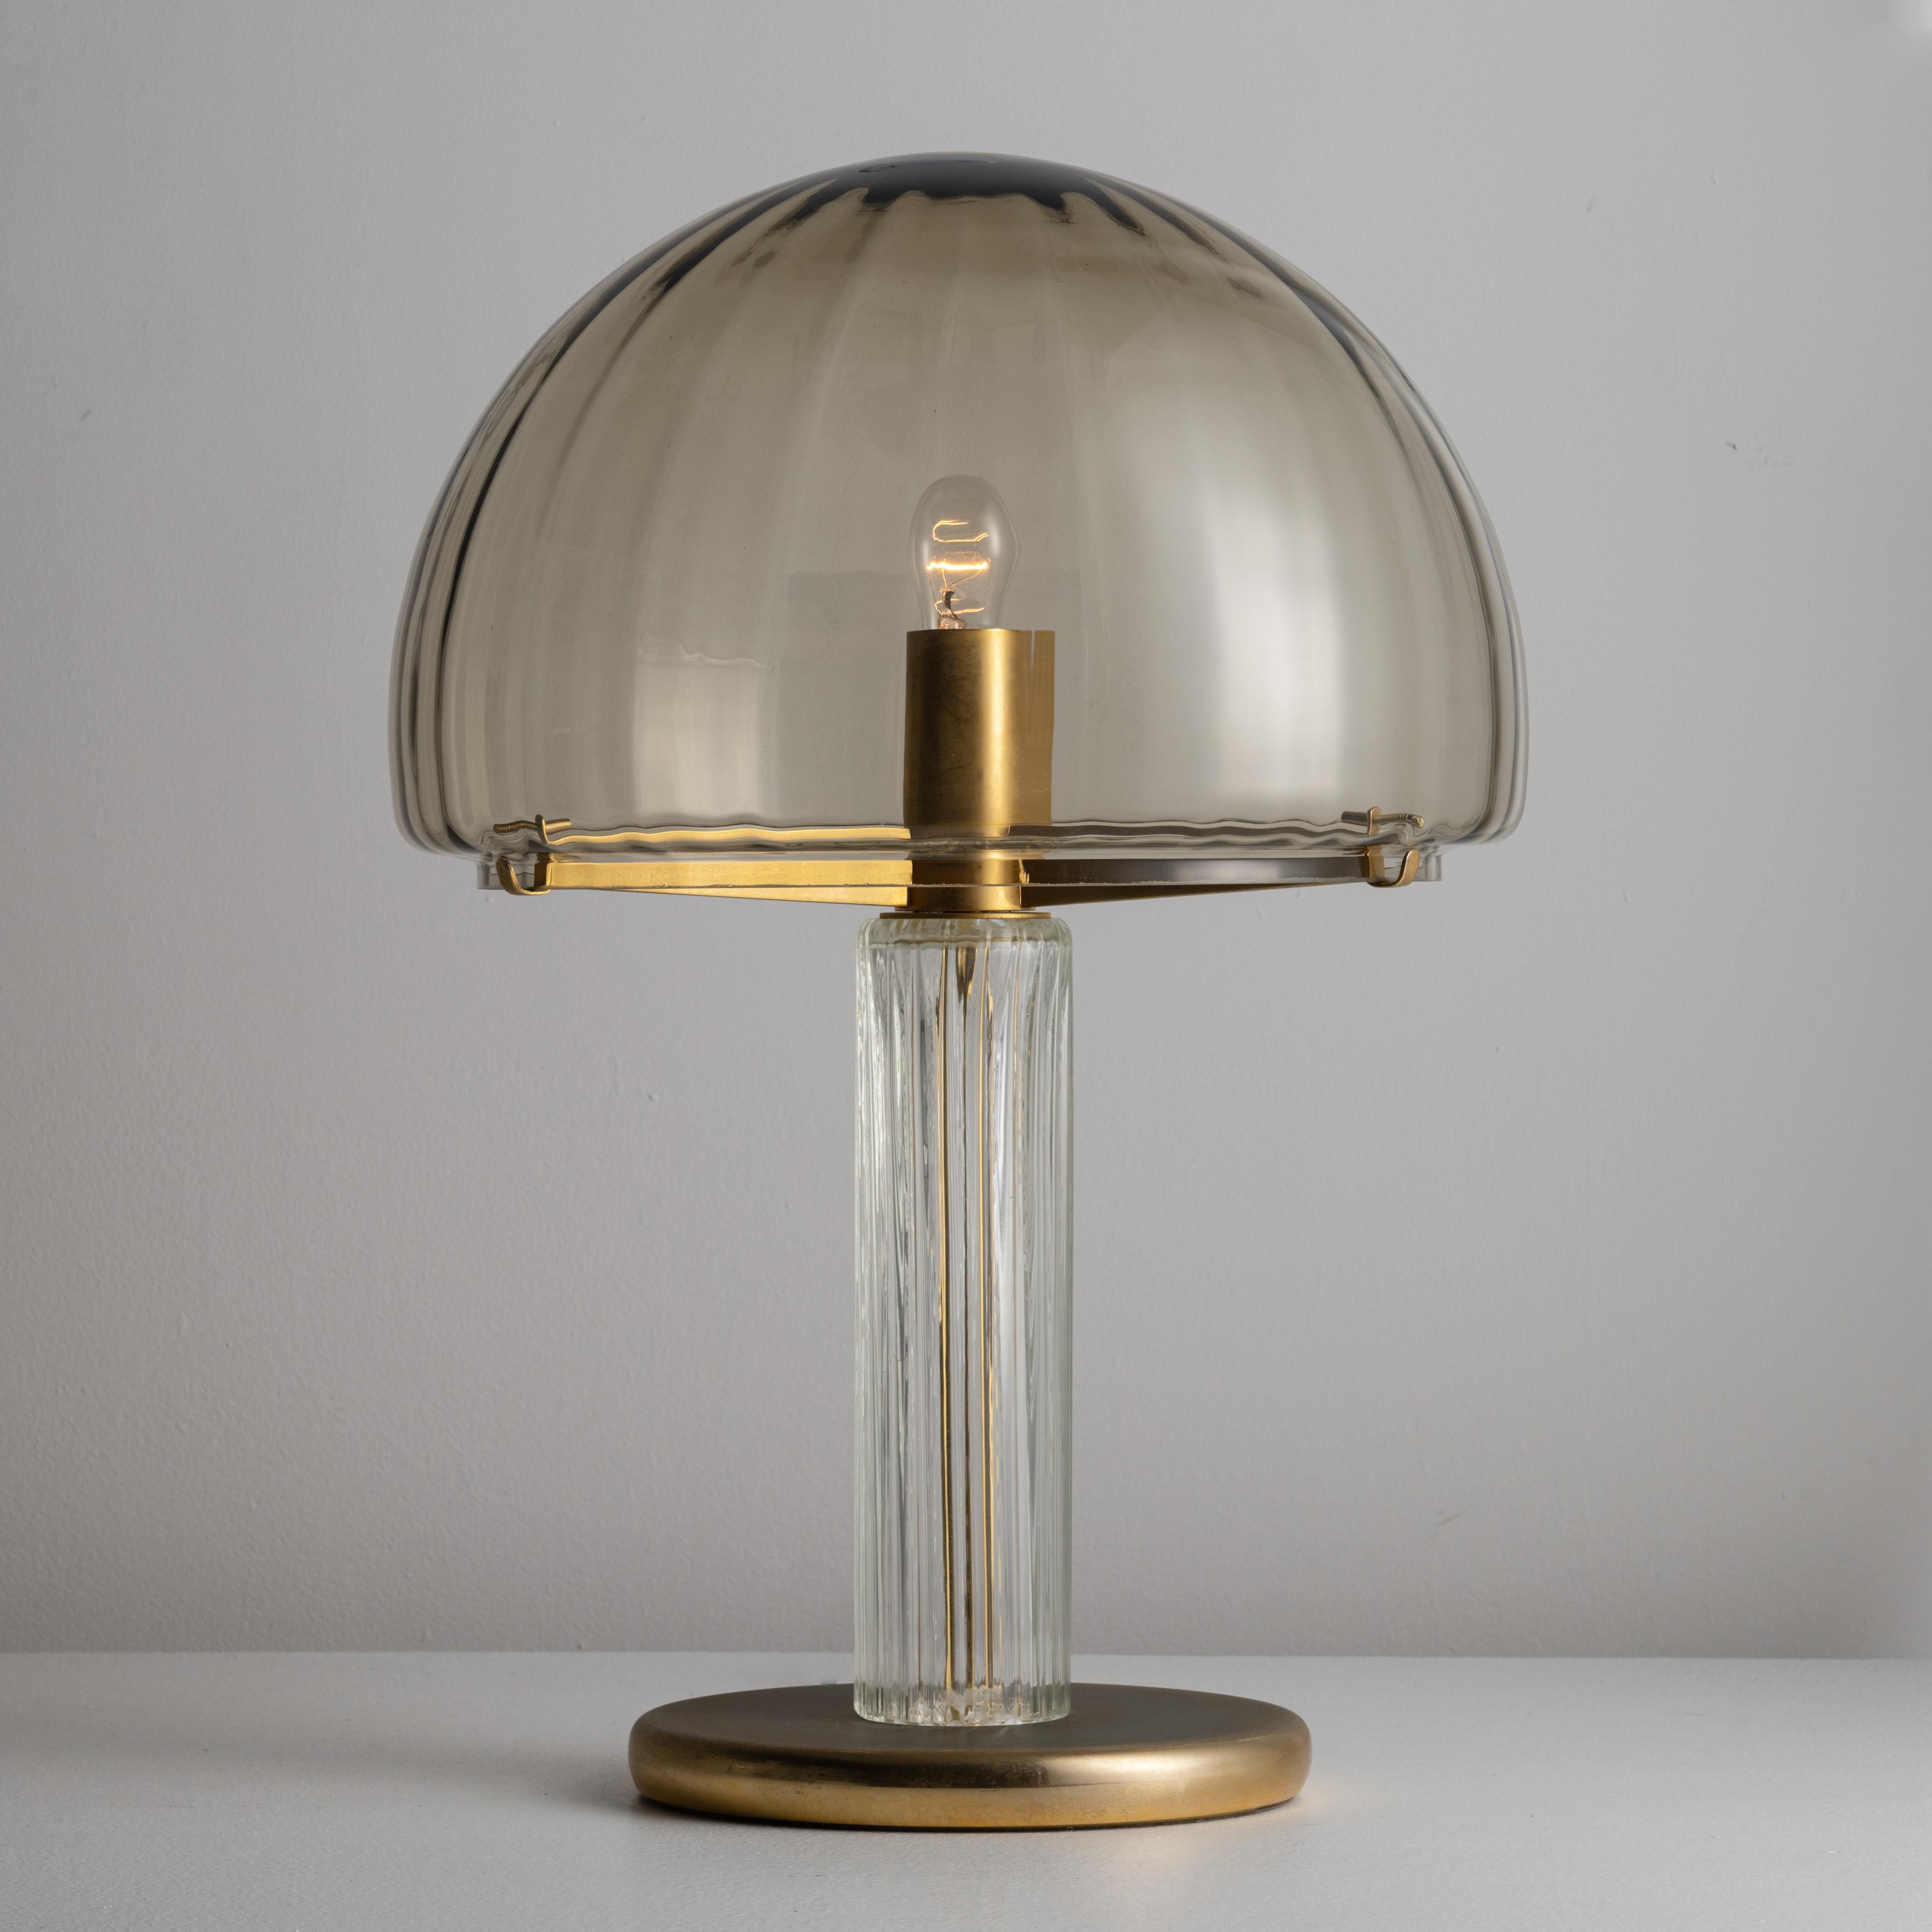 Model 835 'Cordonata' Table Lamp by Venini. Designed and manufactured in Italy, in 1976. An all ribbed 